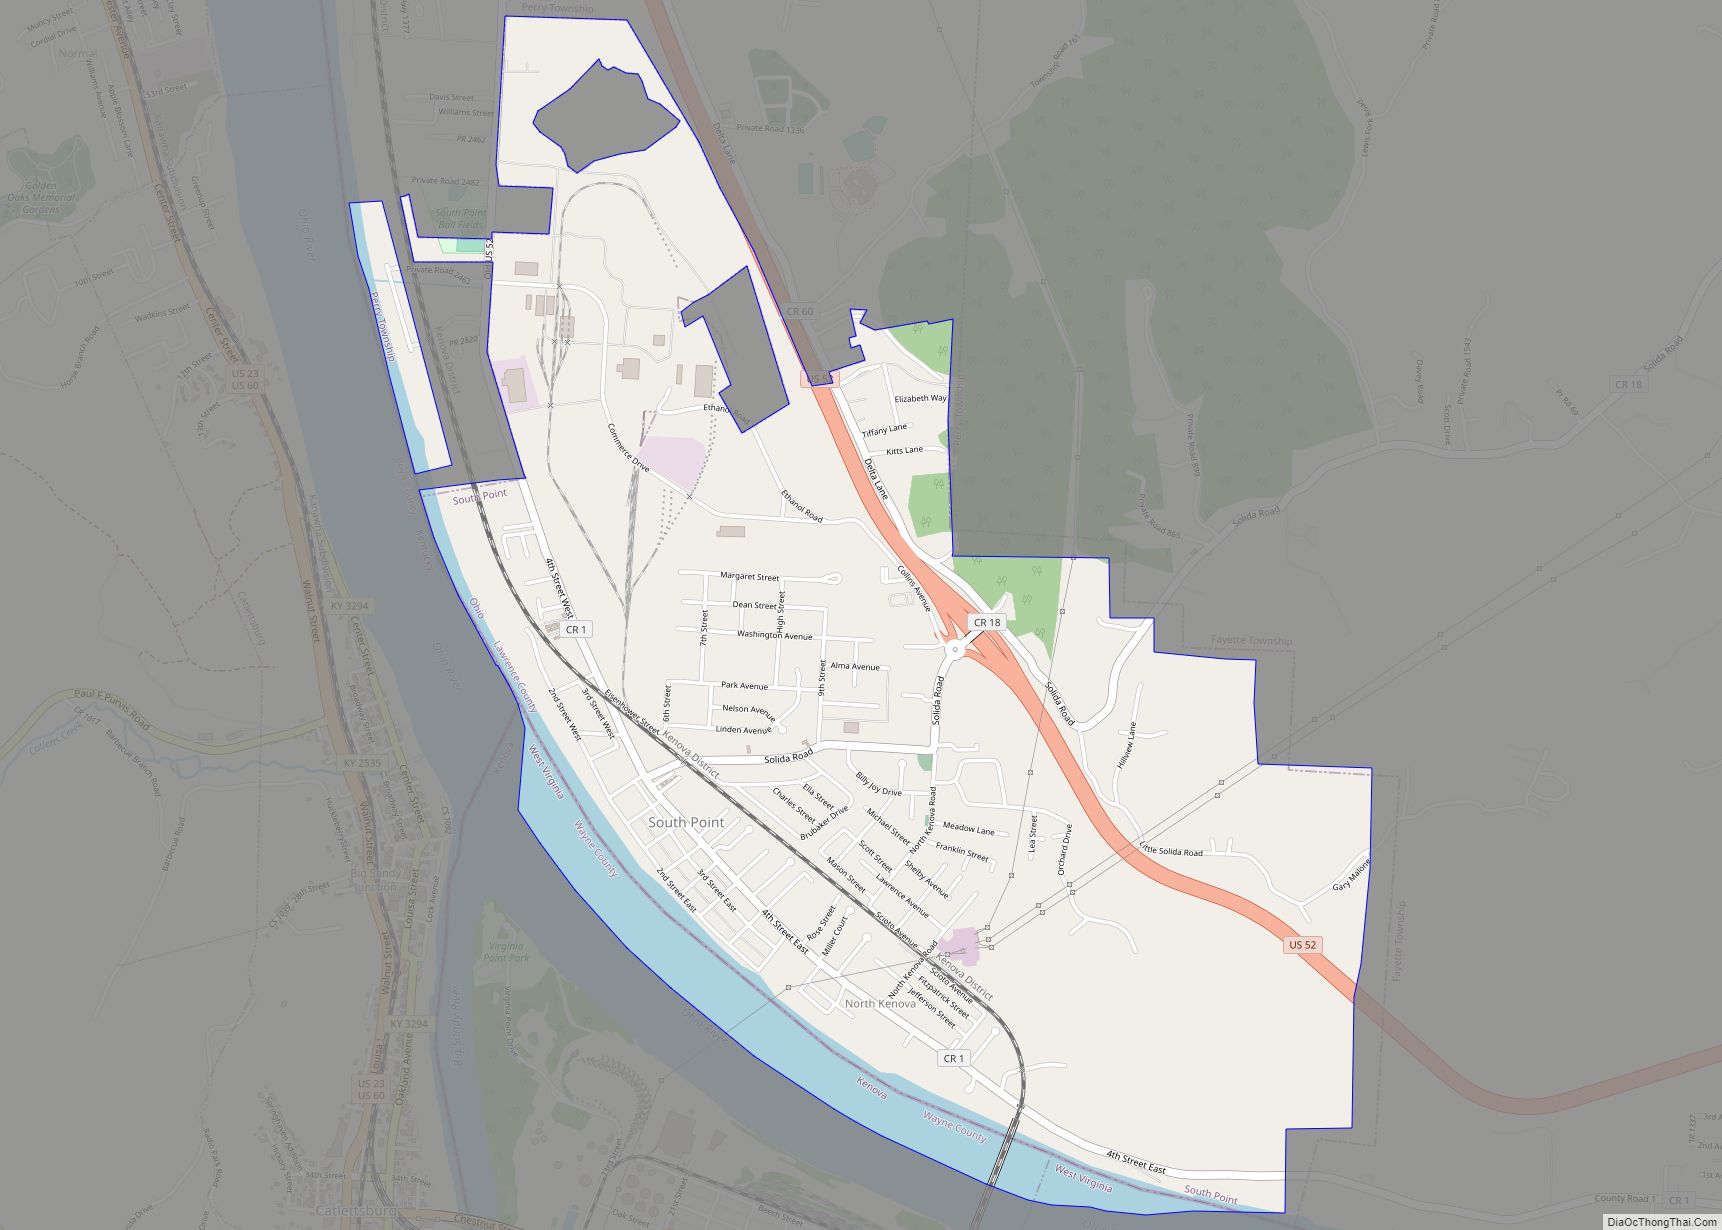 Map of South Point village